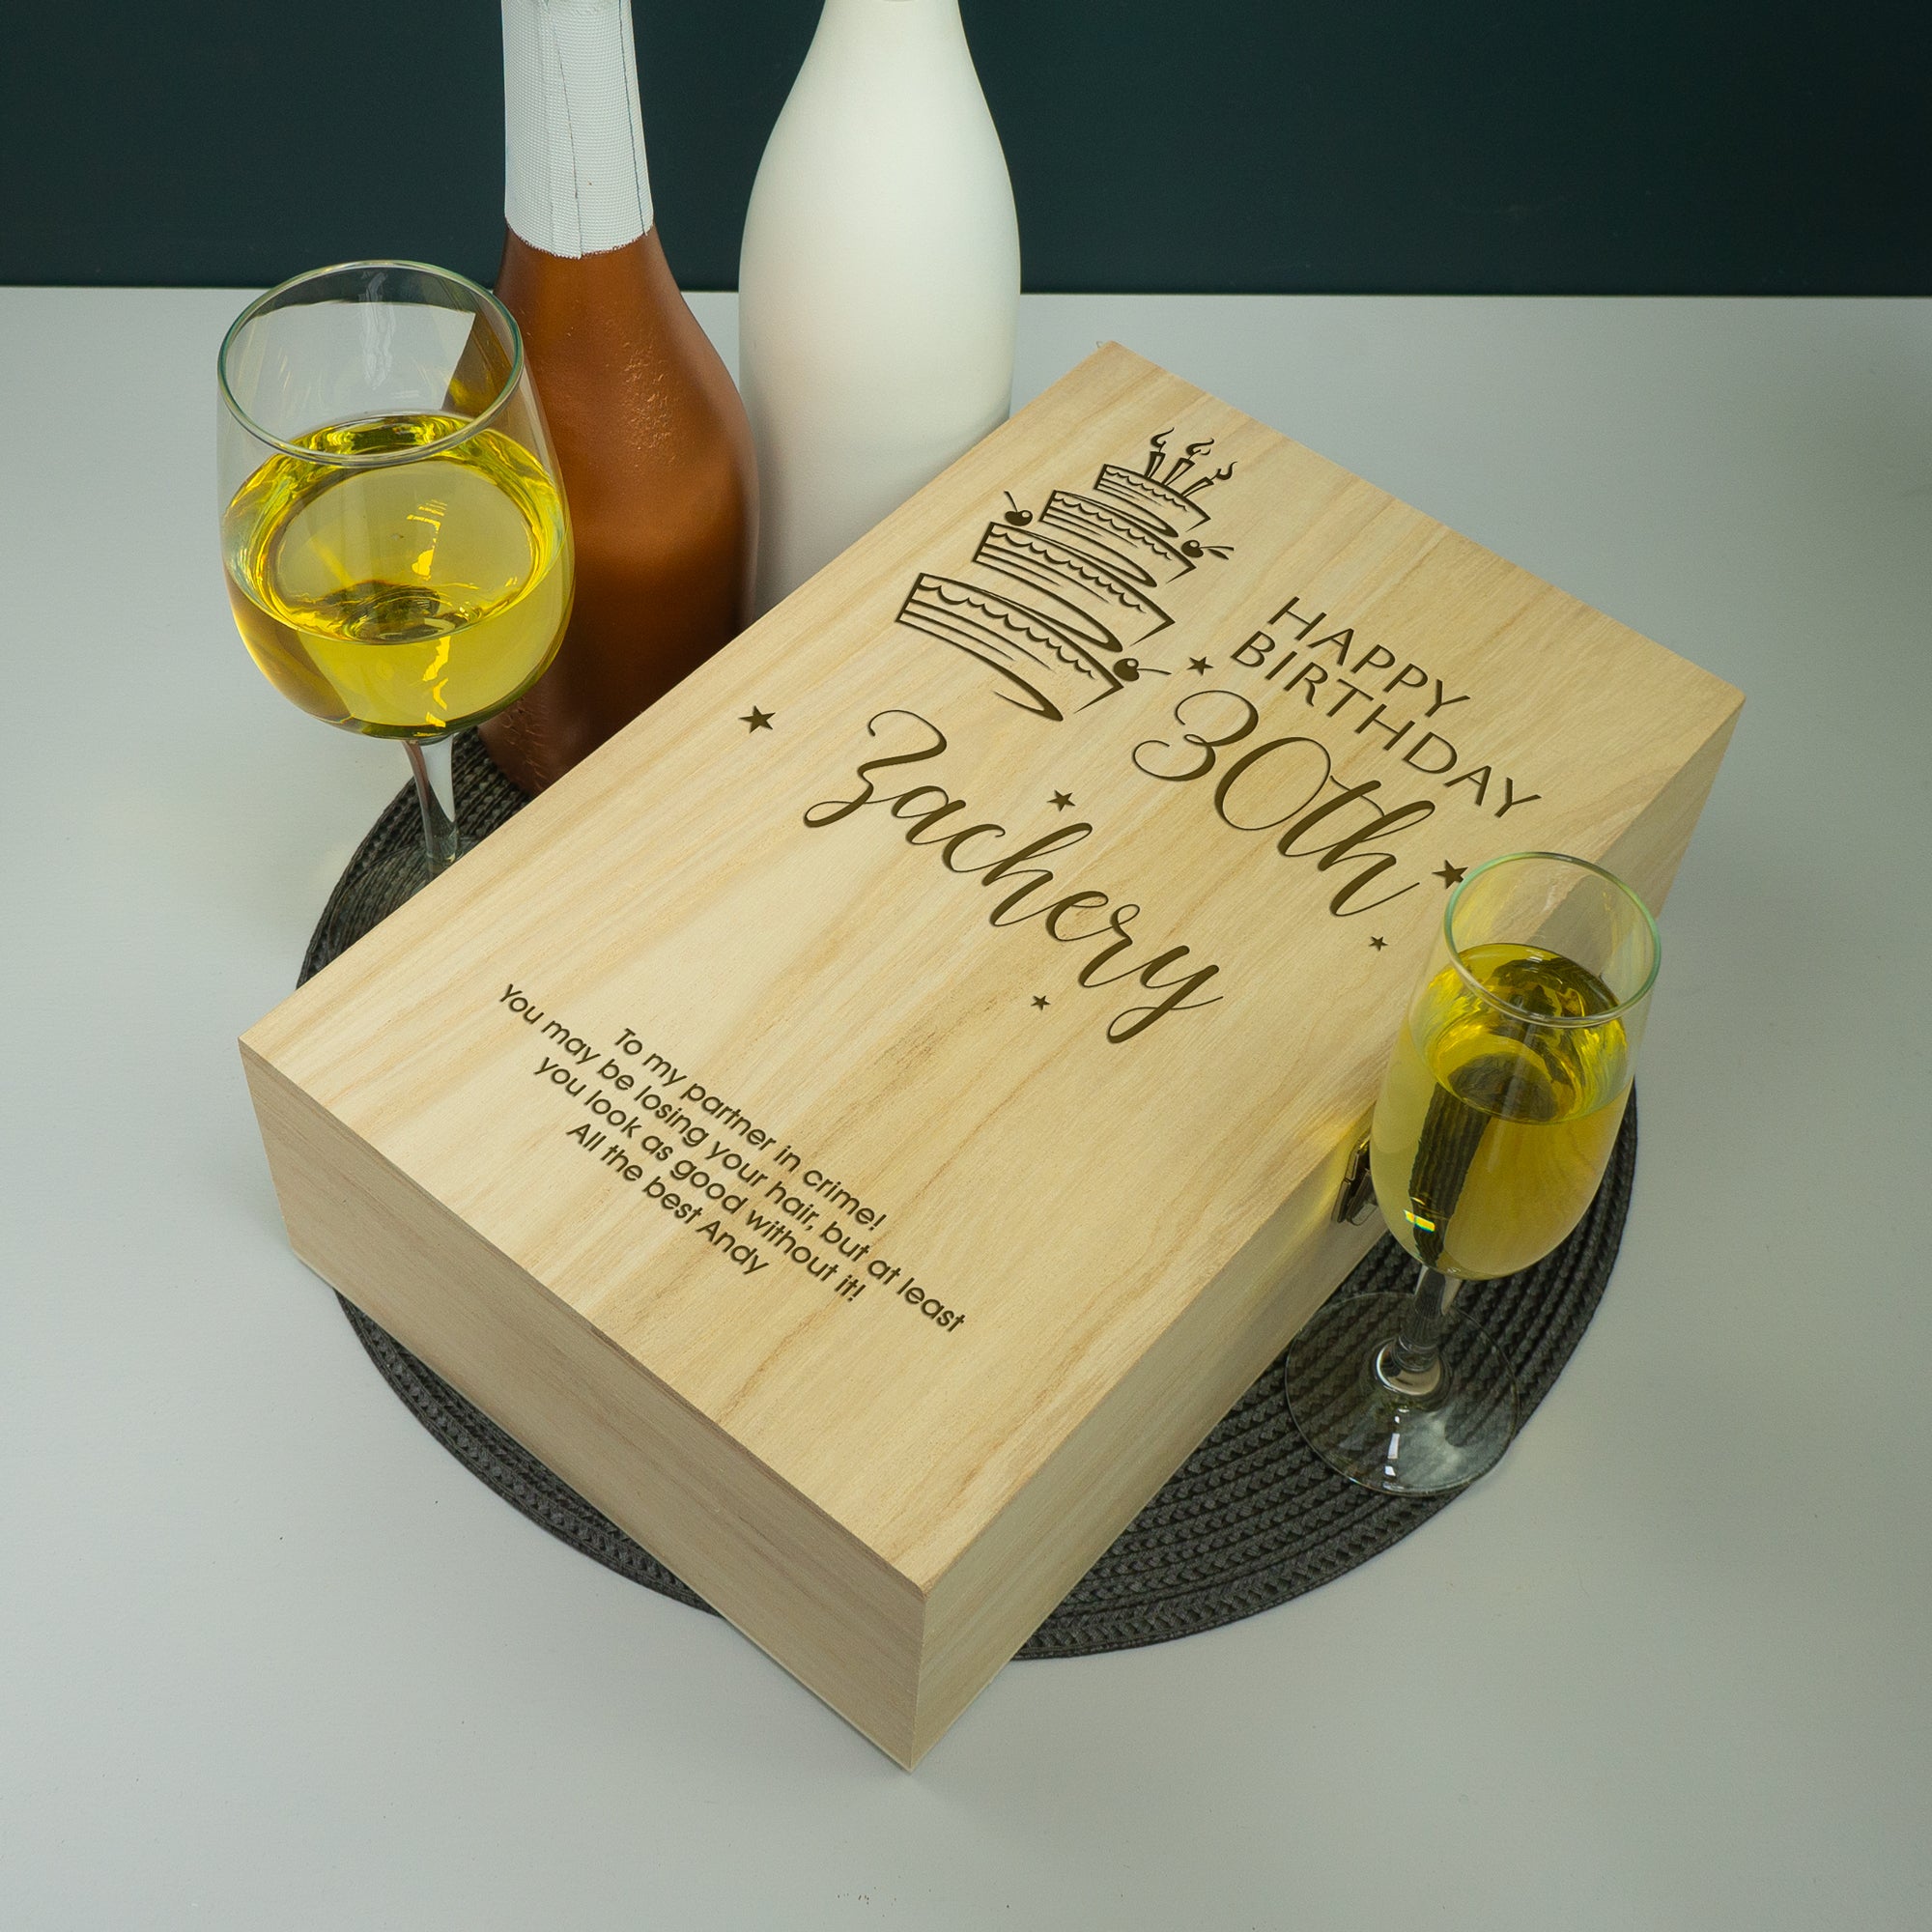 30th birthday twin wine champagne bottle gifting box